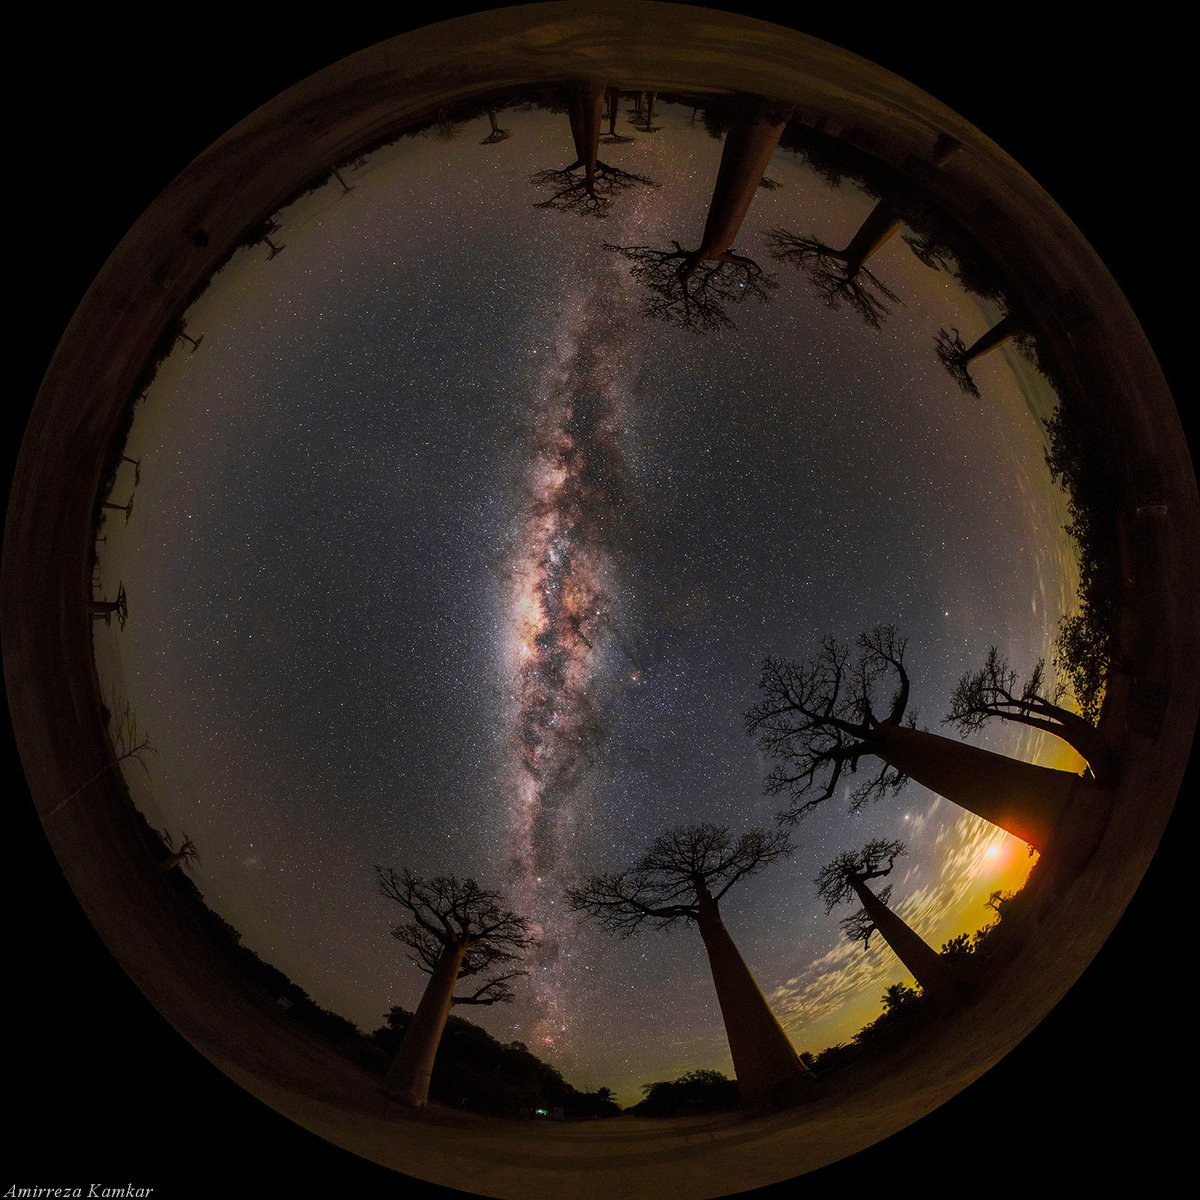 📷: The Baobab Milky Way © @amirrezakamkar, twanight.org/guest From the photographer: “This panorama all-sky image has been captured at the Avenue of Baobabs in Madagascar. The Milky Way was high in the southern sky while moon Read more: twanight.org/gallery/the-ba… . #twanight